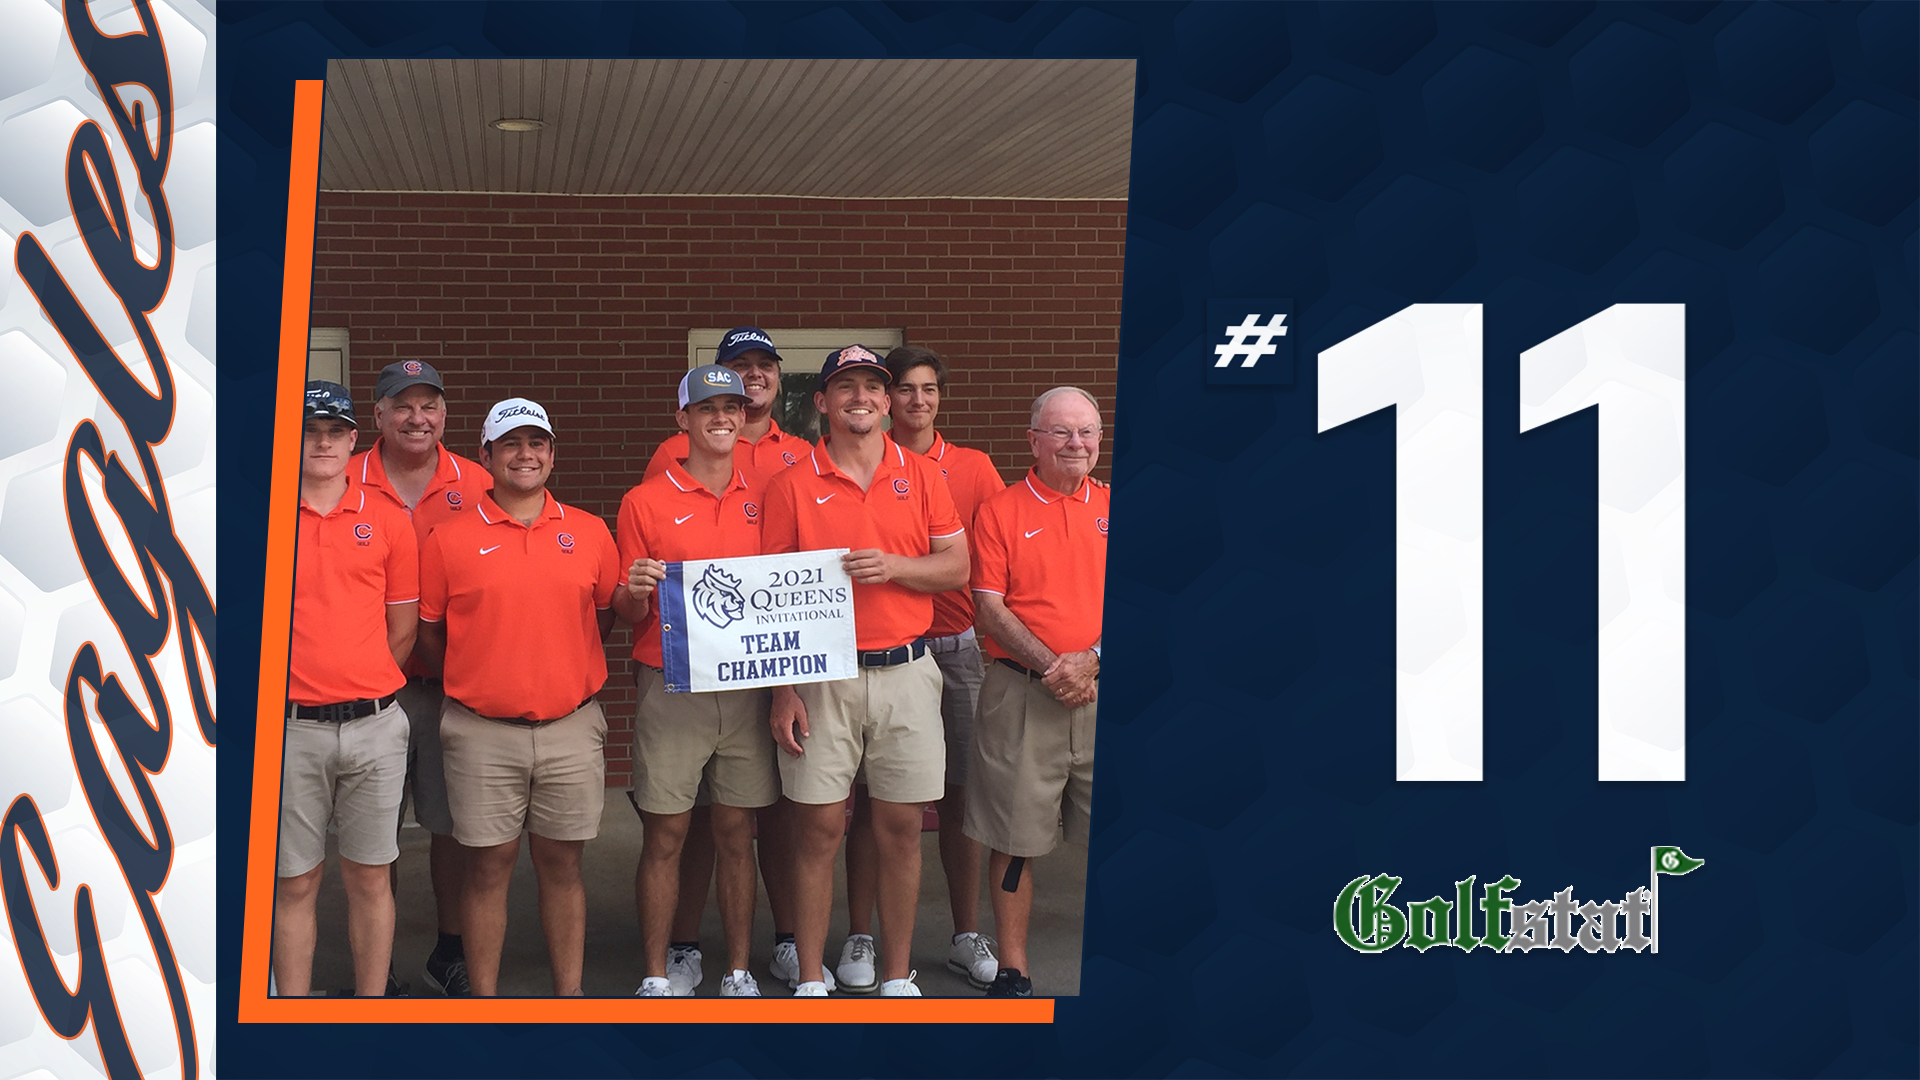 Eagles ranked 11th in latest GolfStat poll